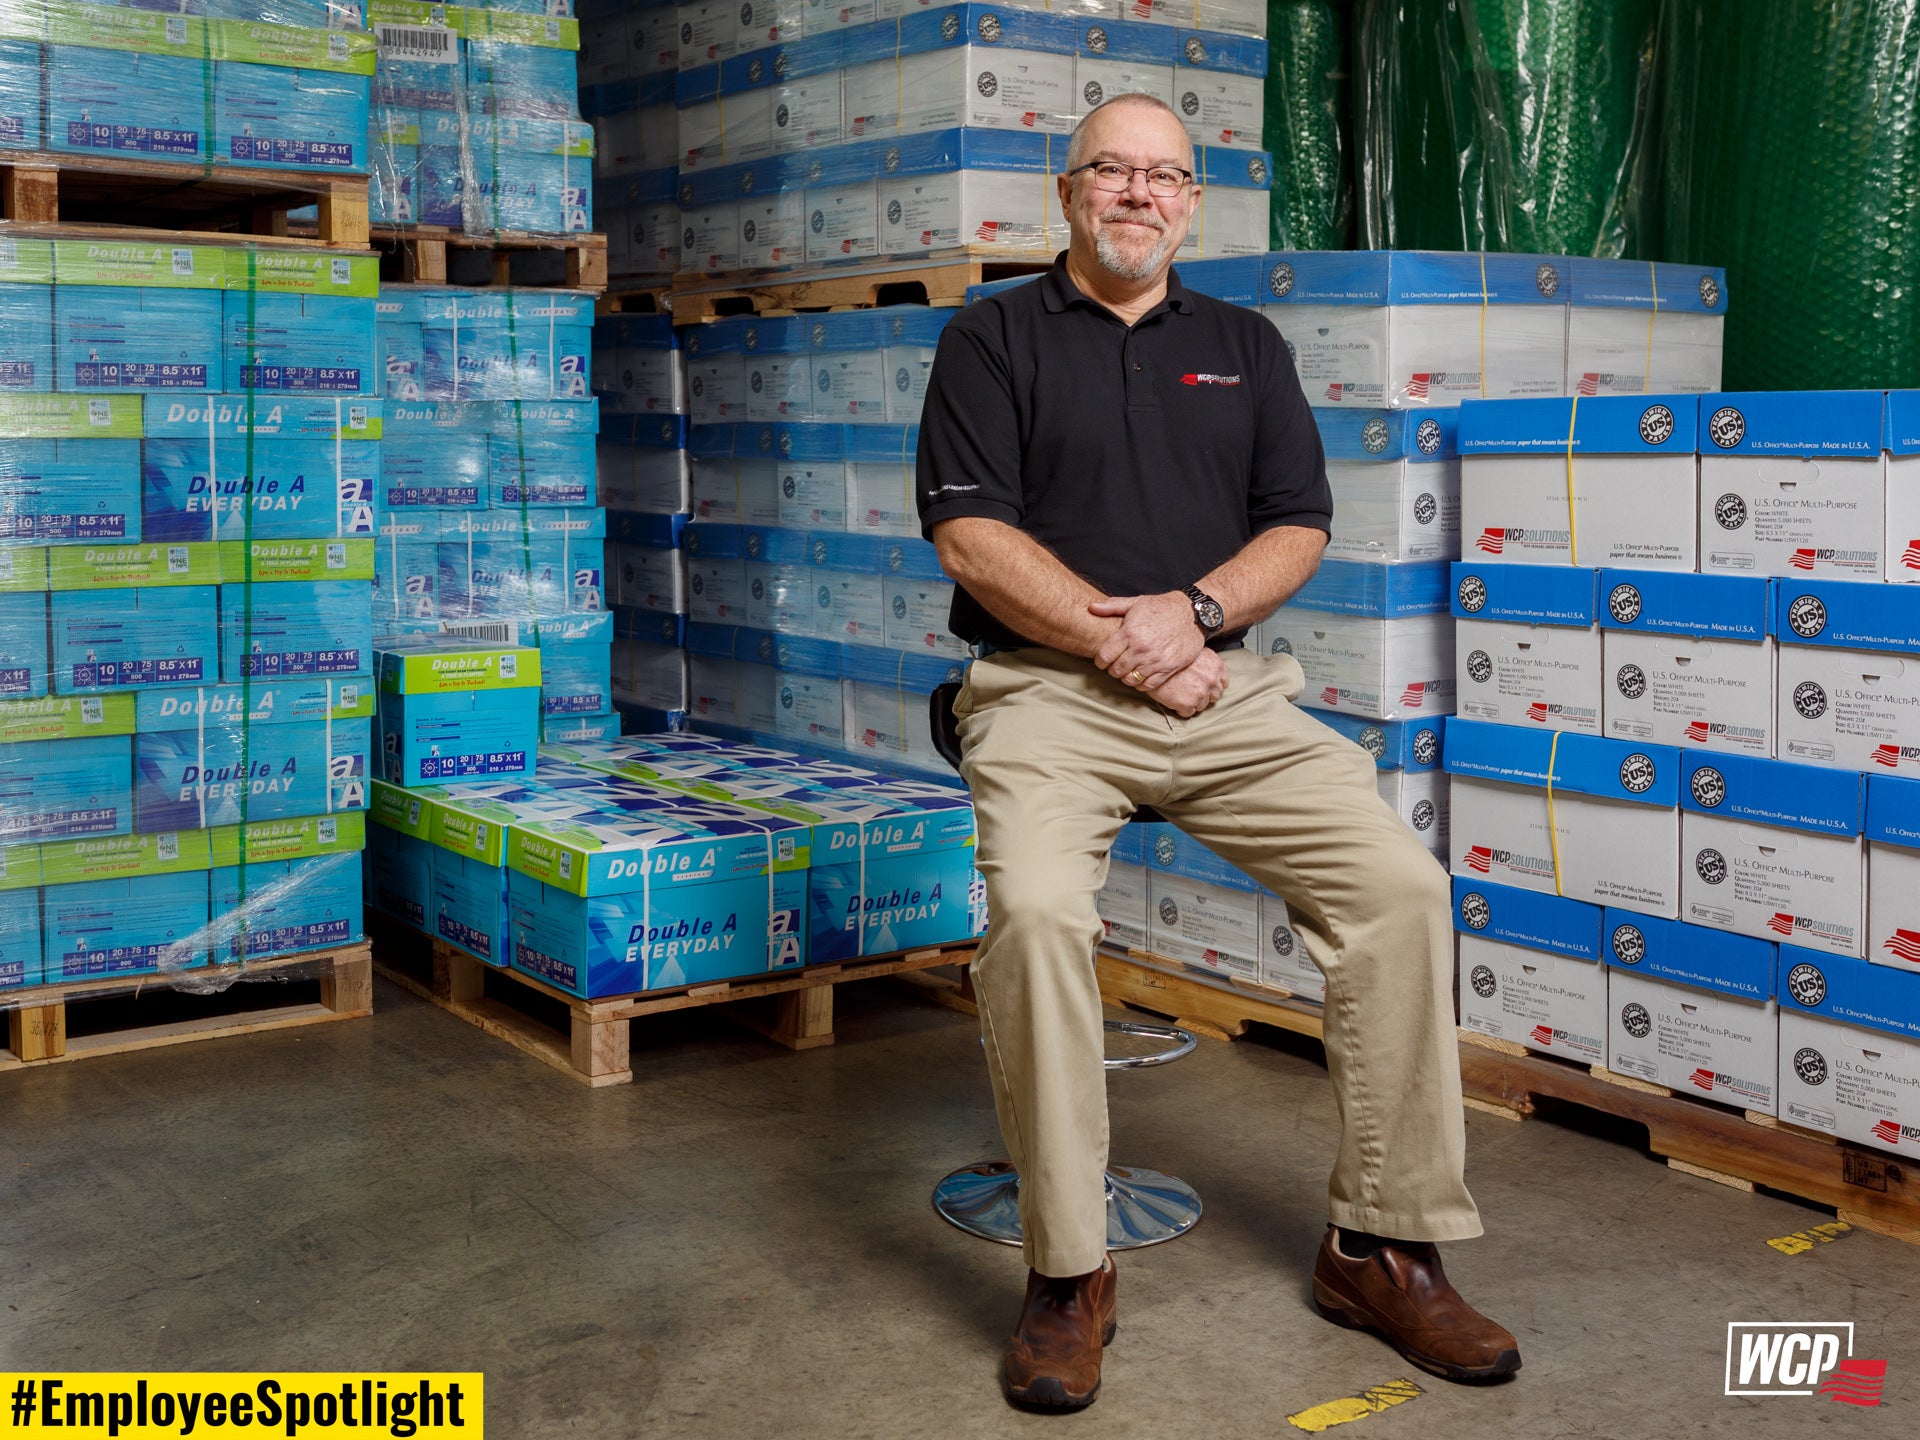 Jeff Bailey - Paper Sales, Account Manager from Eugene, Oregon